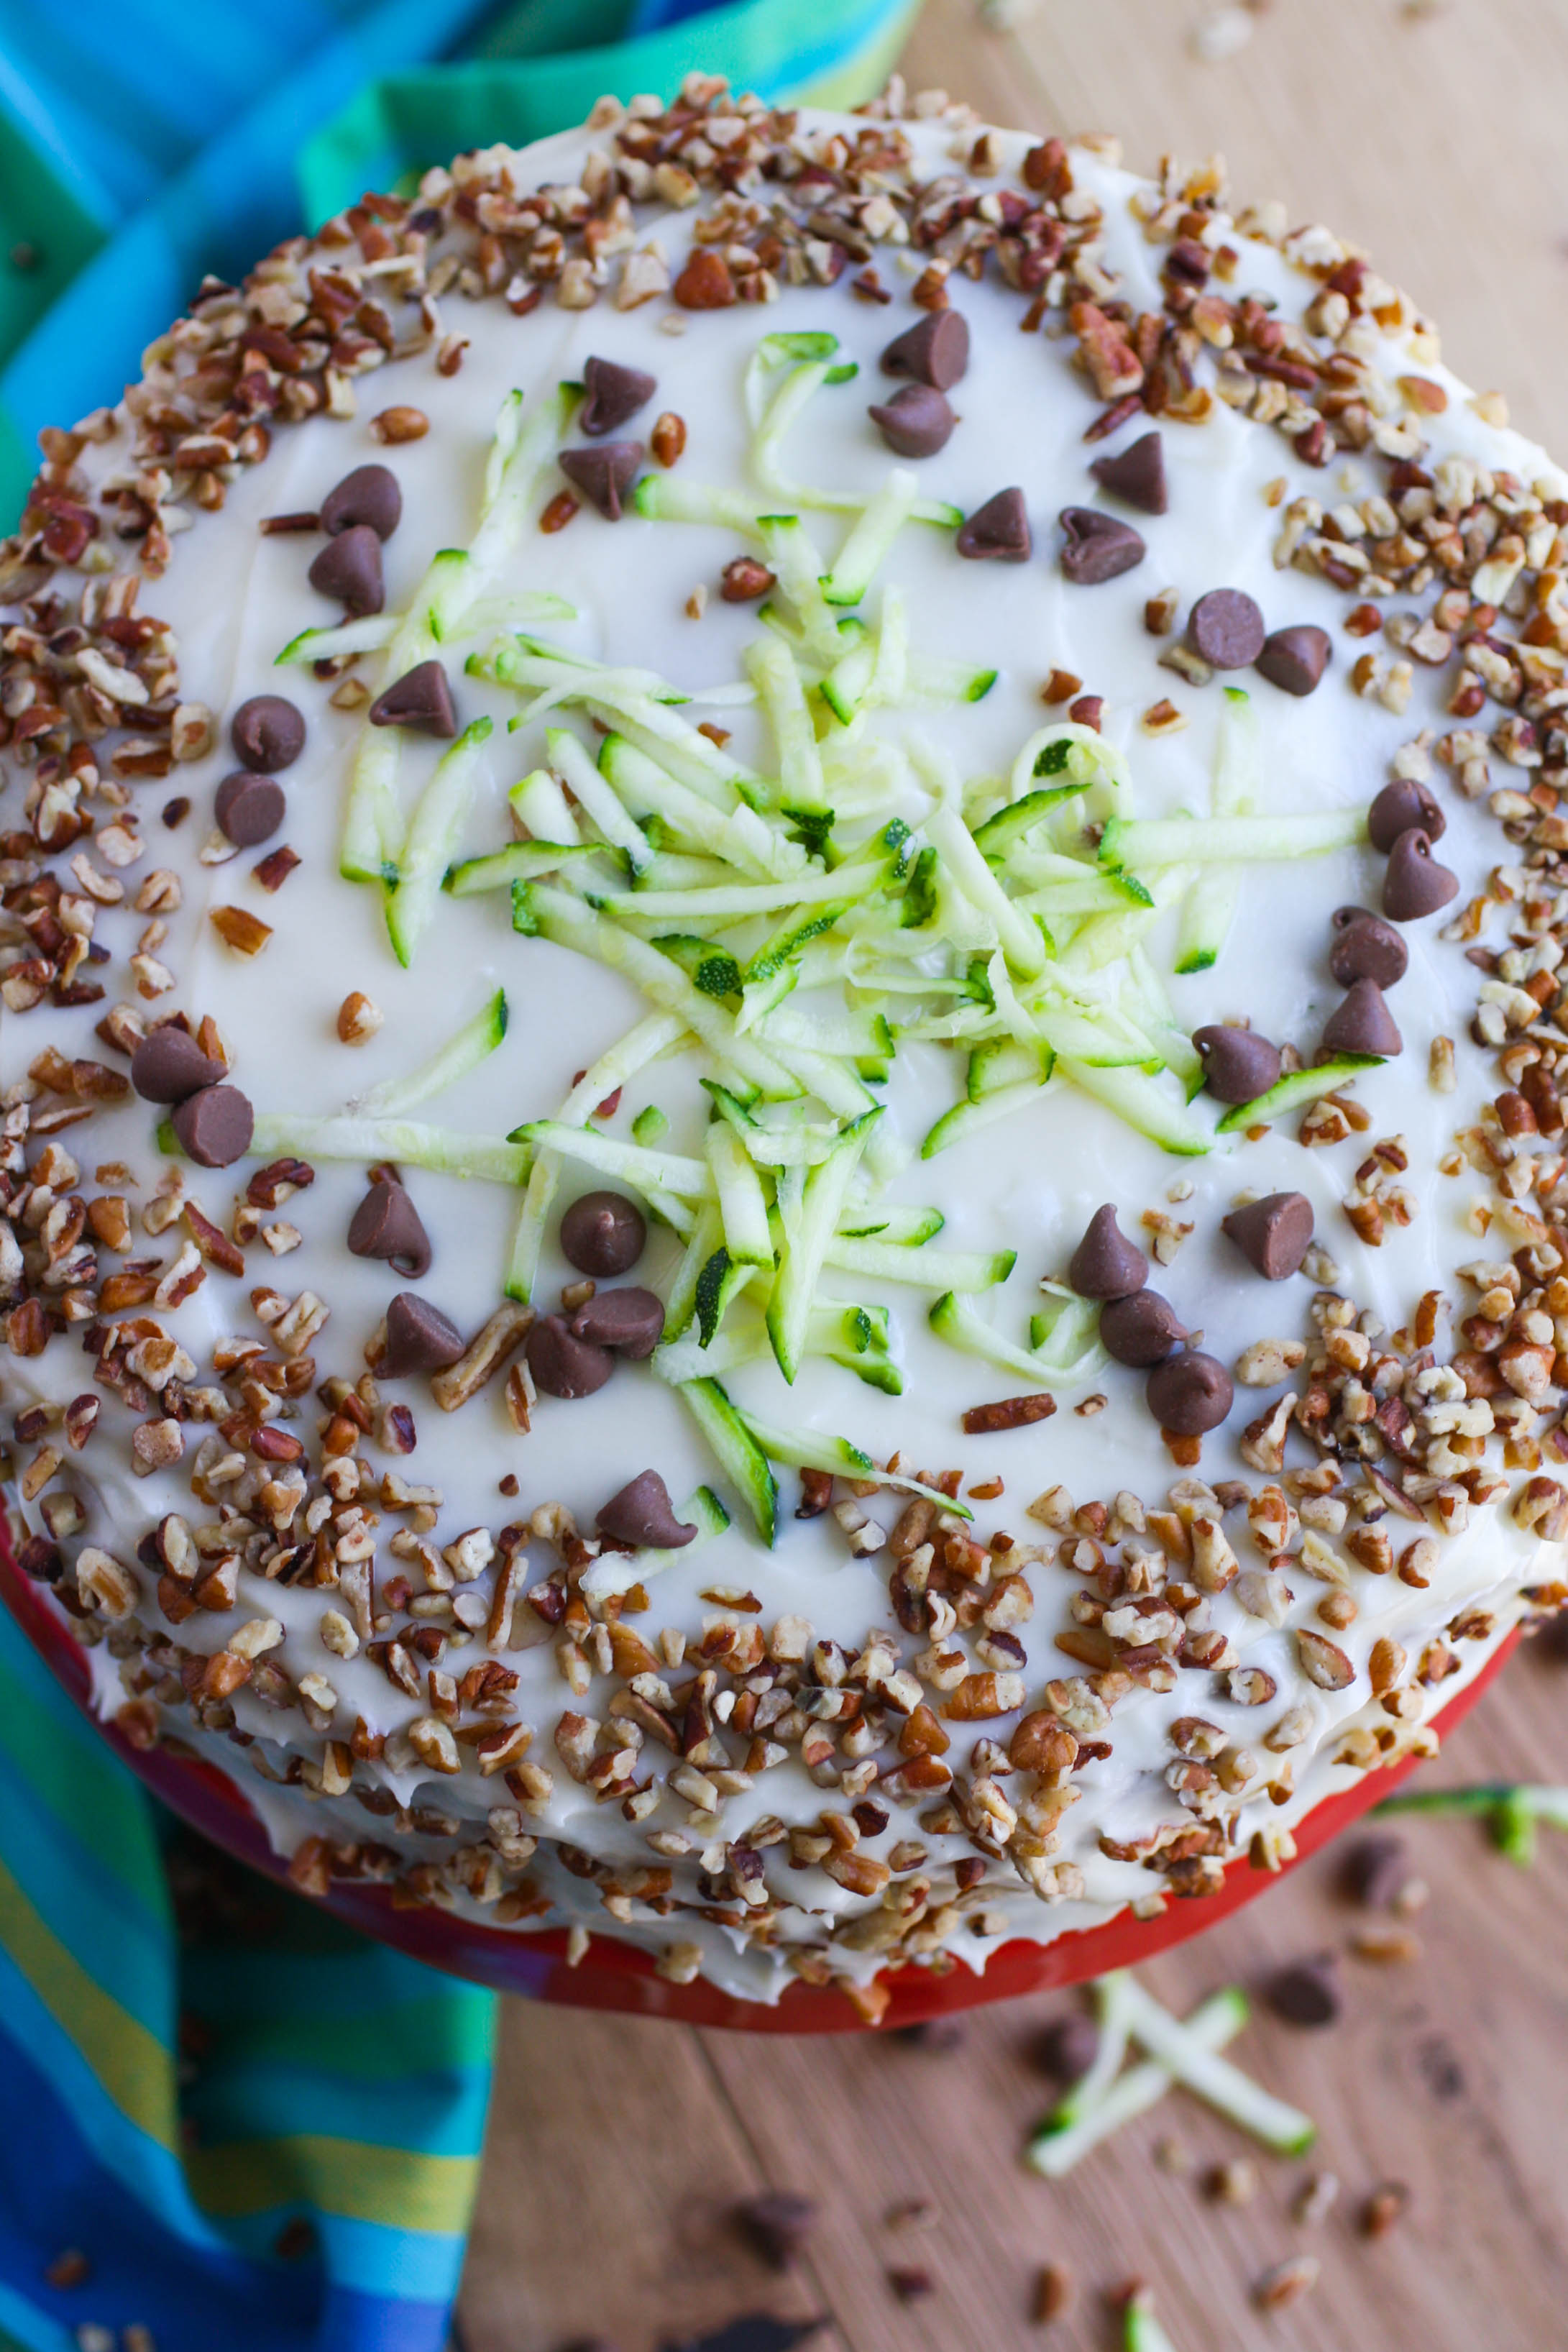 Zucchini-Banana Cake with Cream Cheese Frosting is a fun dessert for the season! You'll love this pretty cake!